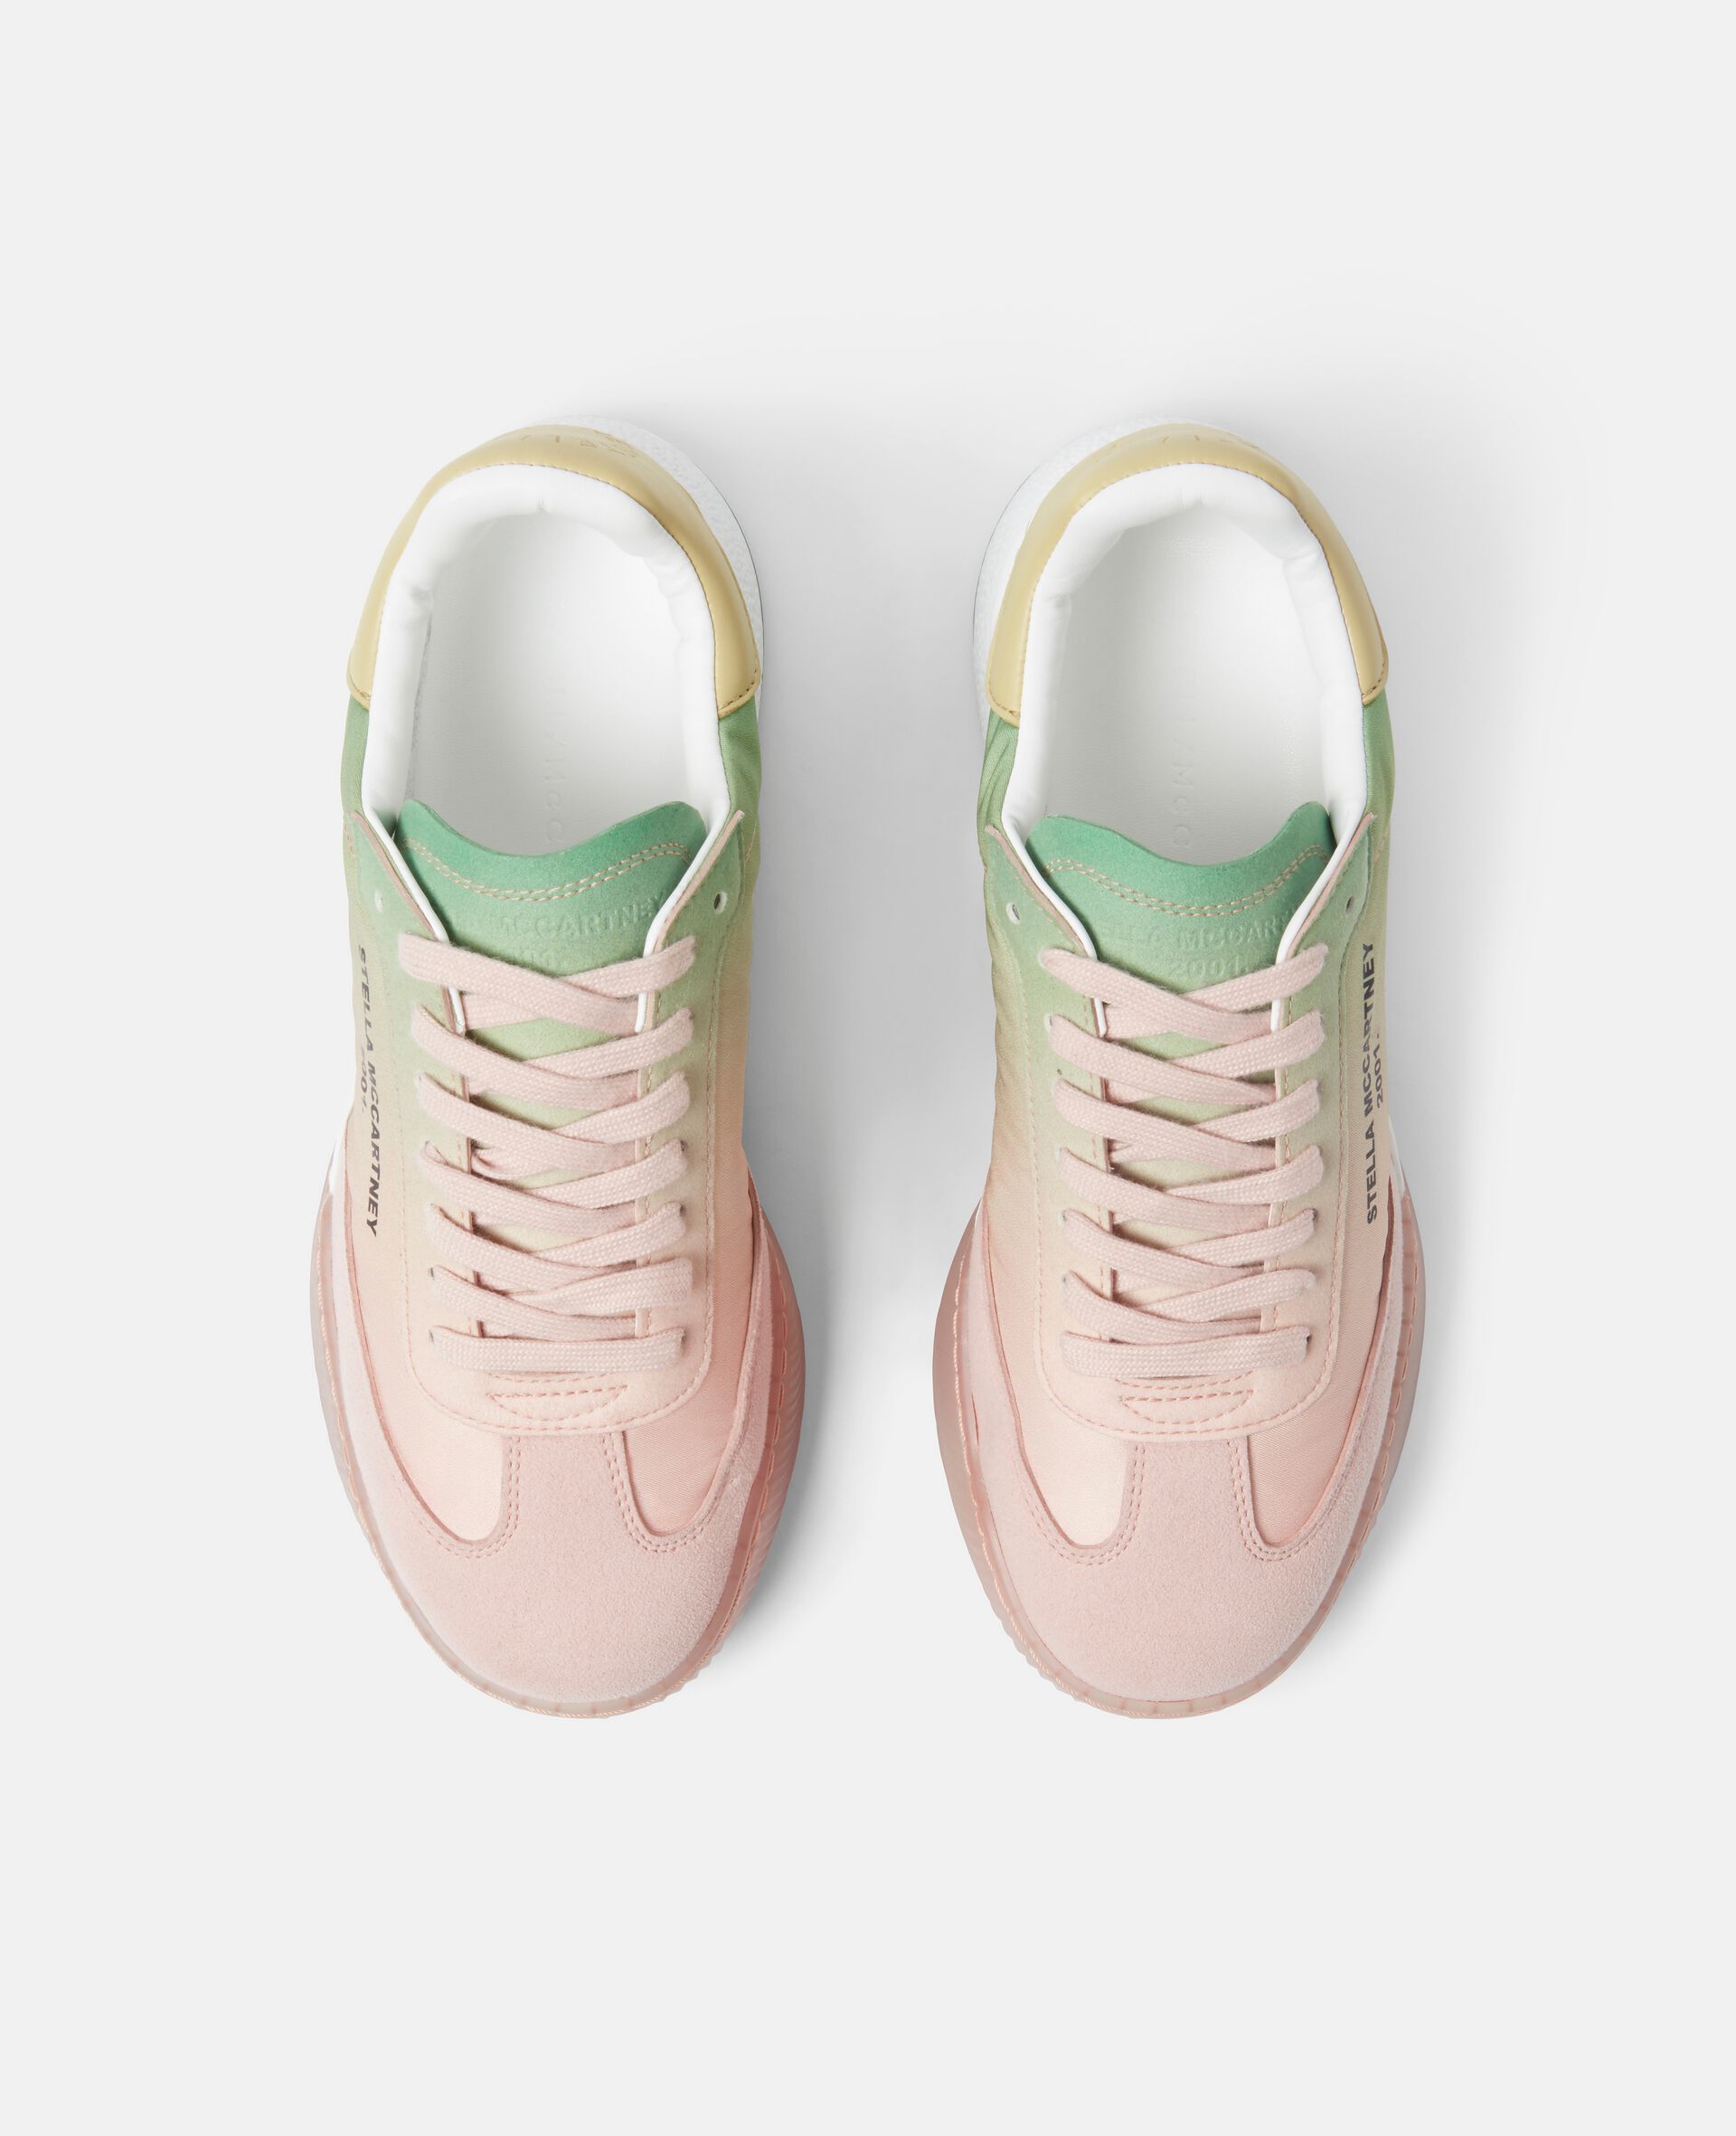 Loop Lace-up Sneakers-Pink-large image number 3